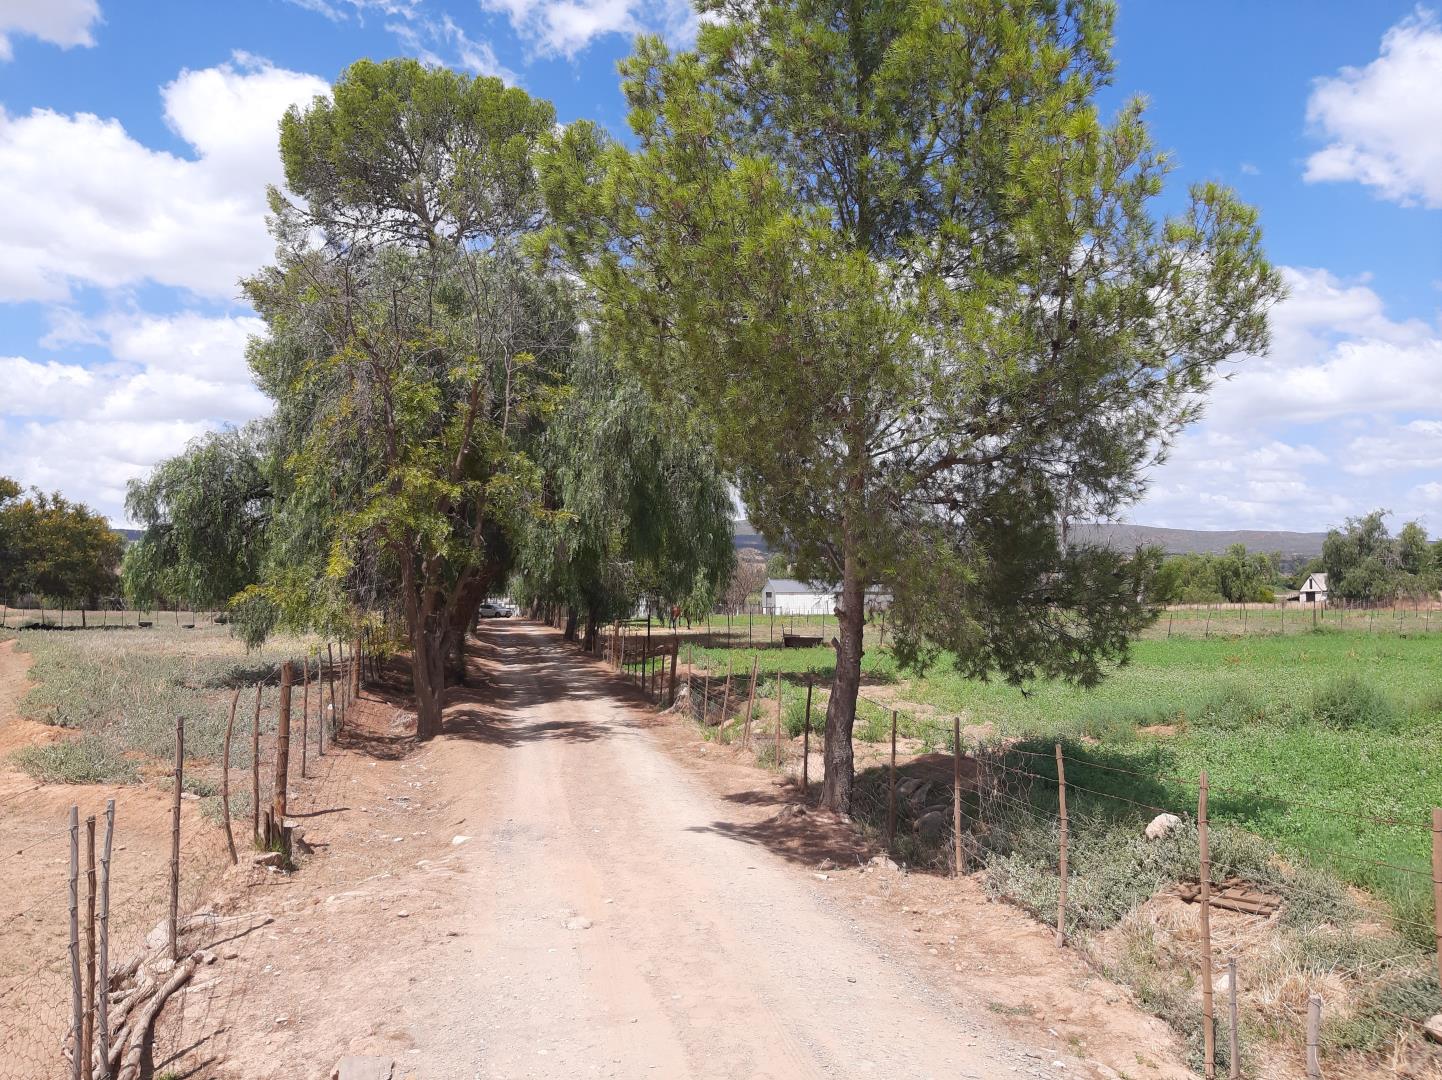 4 Bedroom Farm for Sale - Western Cape